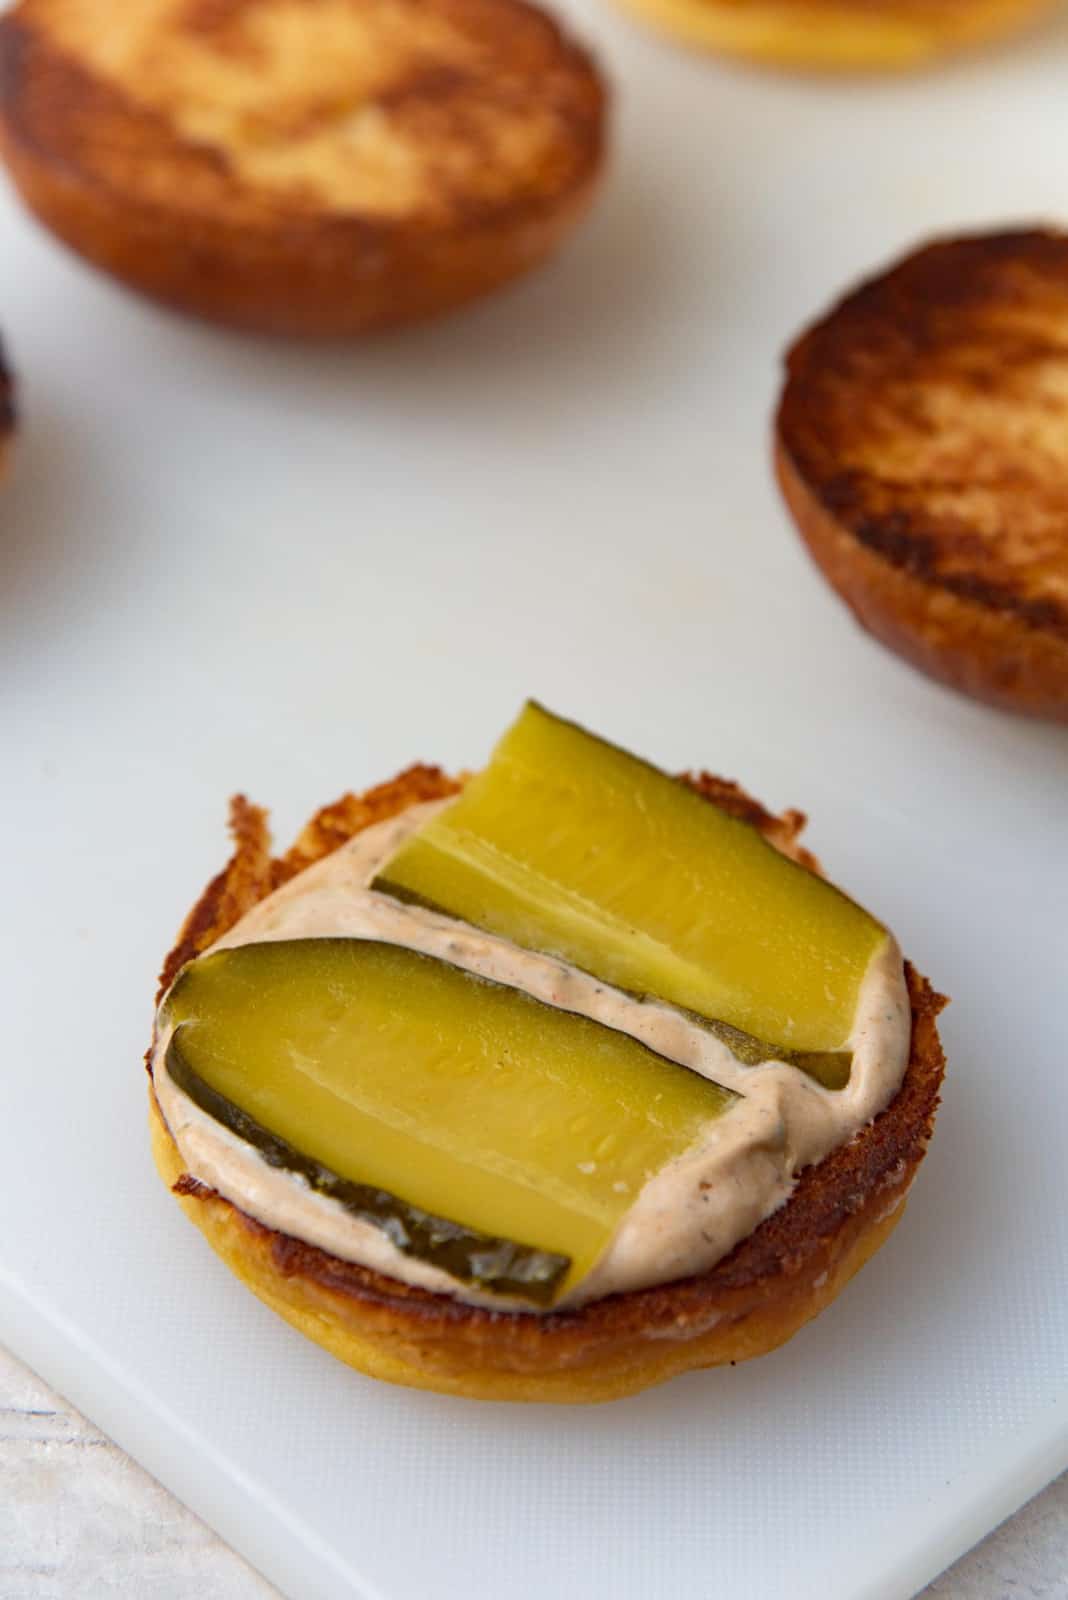 Pickles placed on top of the burger bun